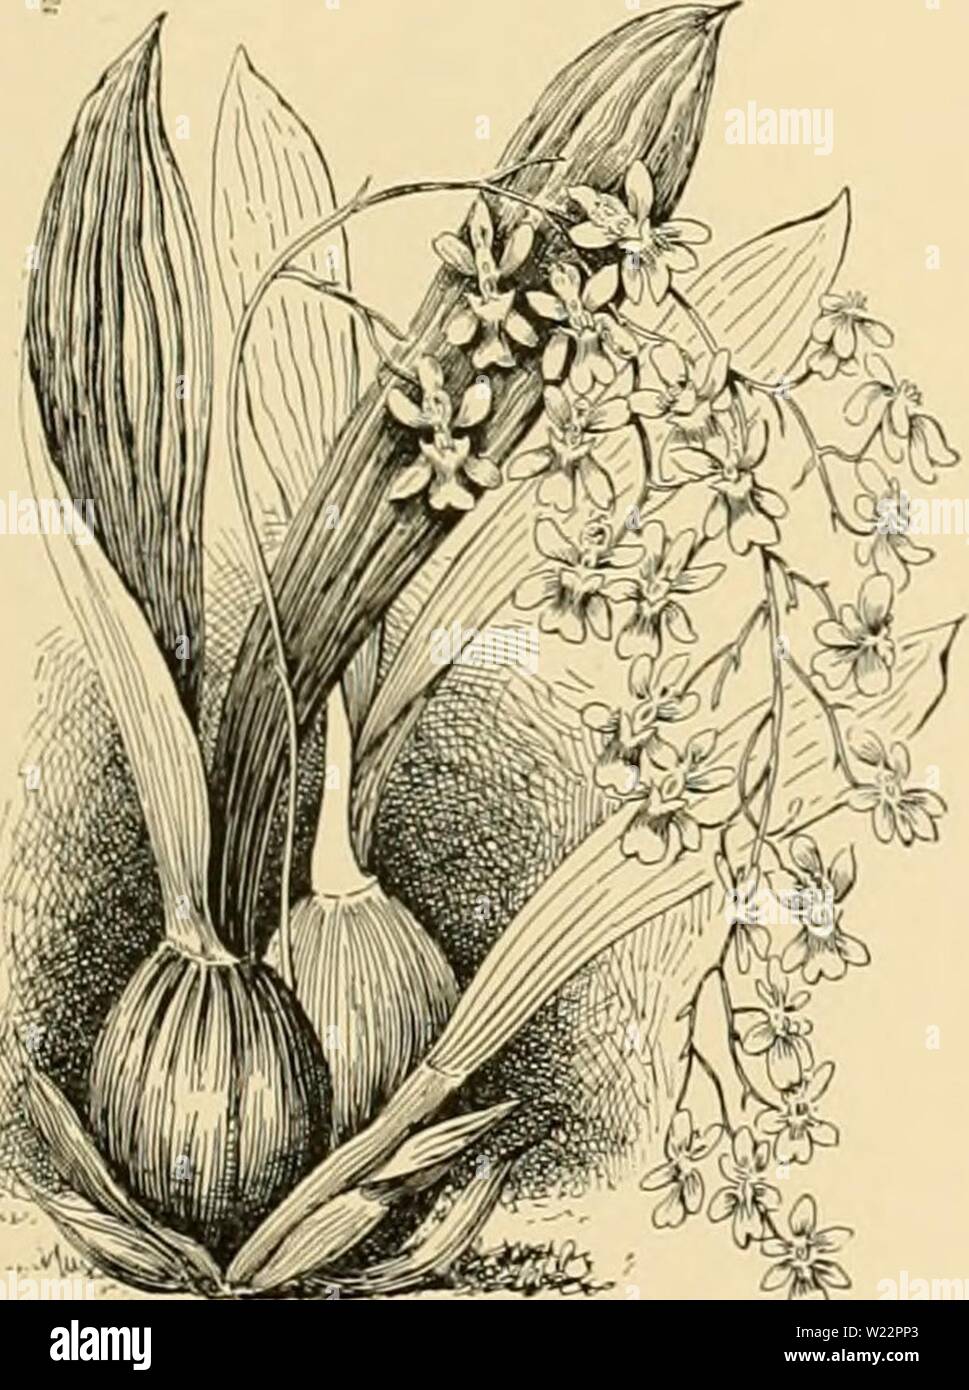 Archive image from page 106 of Cyclopedia of American horticulture . Cyclopedia of American horticulture : comprising suggestions for cultivation of horticultural plants, descriptions of the species of fruits, vegetables, flowers, and ornamental plants sold in the United States and Canada, together with geographical and biographical sketches  cyclopediaofame03bail Year: 1906  ONCIDIUJI (NCIDILM 1133 25. altlssimum, Swartz. Pseudobulbs nearly rotund, much compressed and edged: Ivs. 1-2 at the top and several at the base of the pseudobulb, ensiform, keeled, lK-2 ft. long: inflorescence an almost Stock Photo